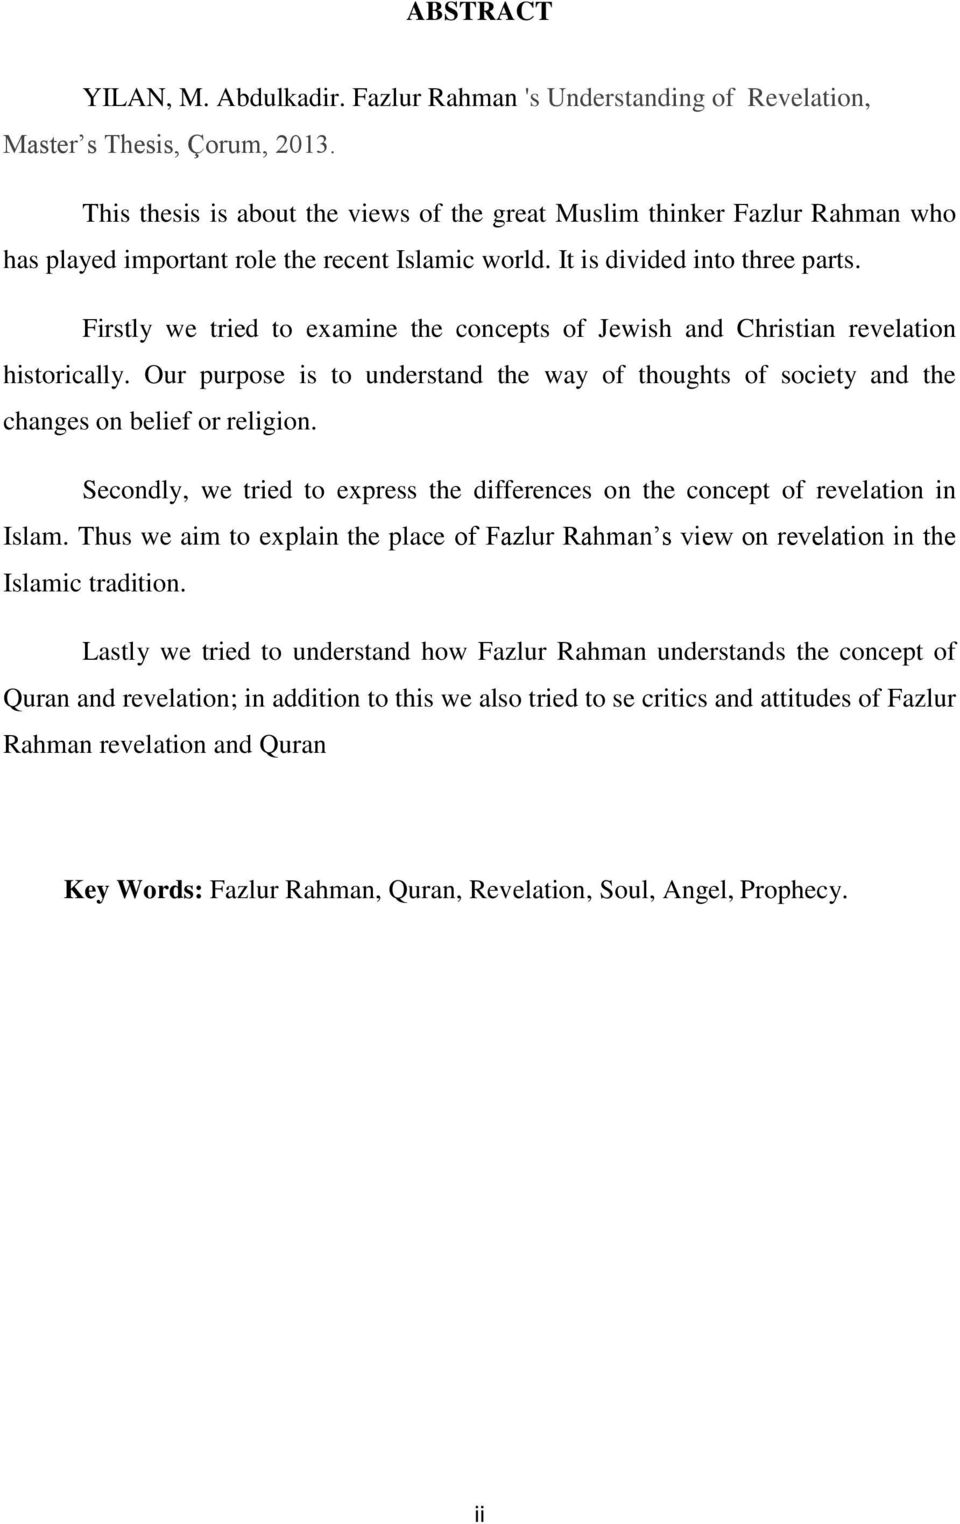 Firstly we tried to examine the concepts of Jewish and Christian revelation historically. Our purpose is to understand the way of thoughts of society and the changes on belief or religion.